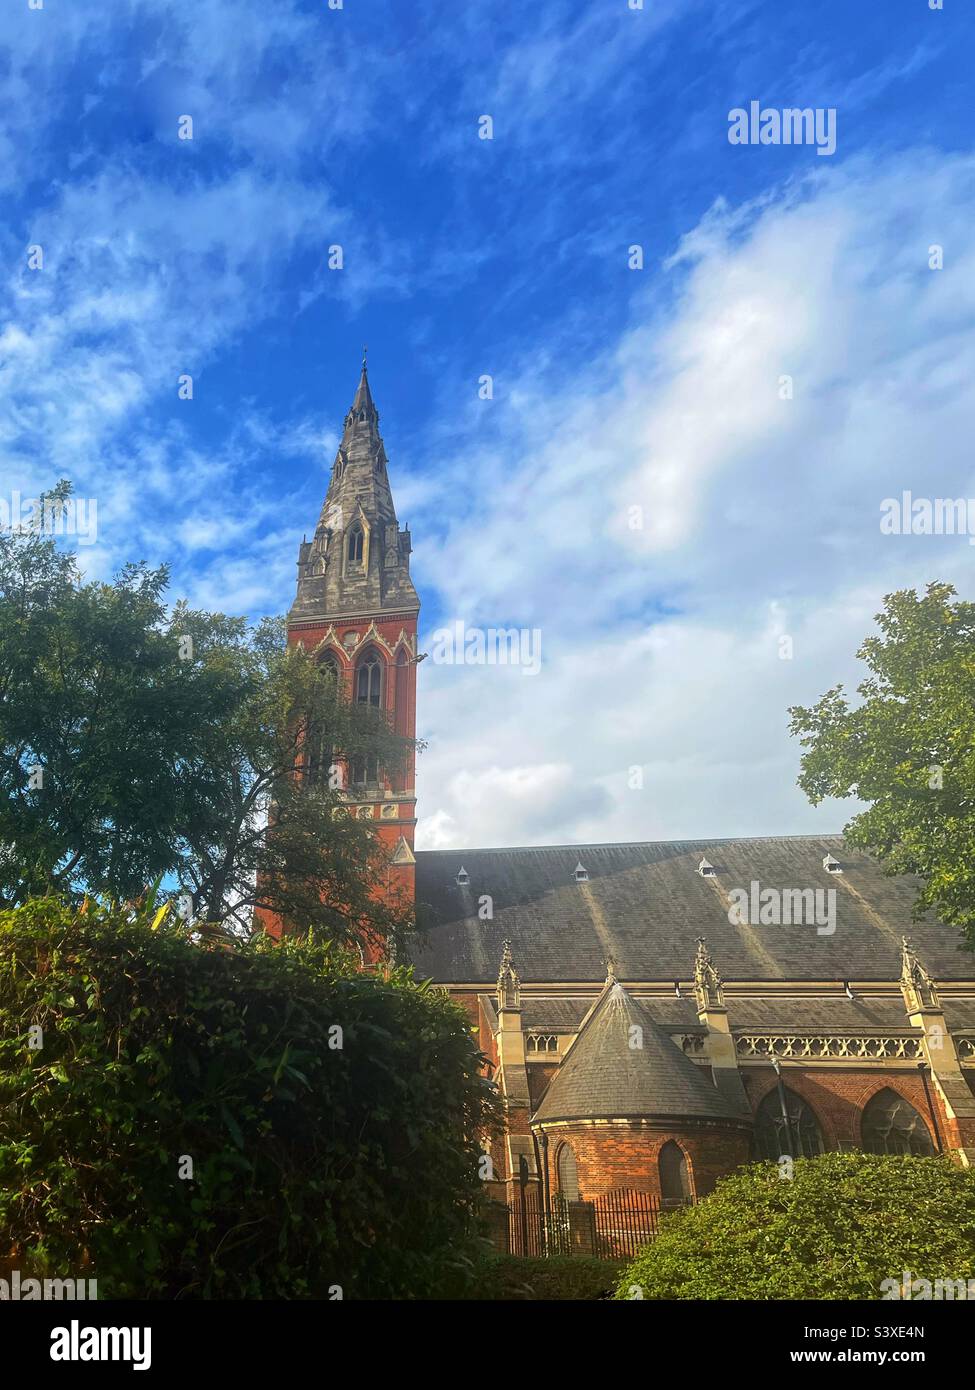 View of St John the Divine, Kennington, South East London, Grade I Listed Building, seen from Dan Leno Gardens - Dan Leno lived nearby - the church spire is imposing and has a clock. Stock Photo